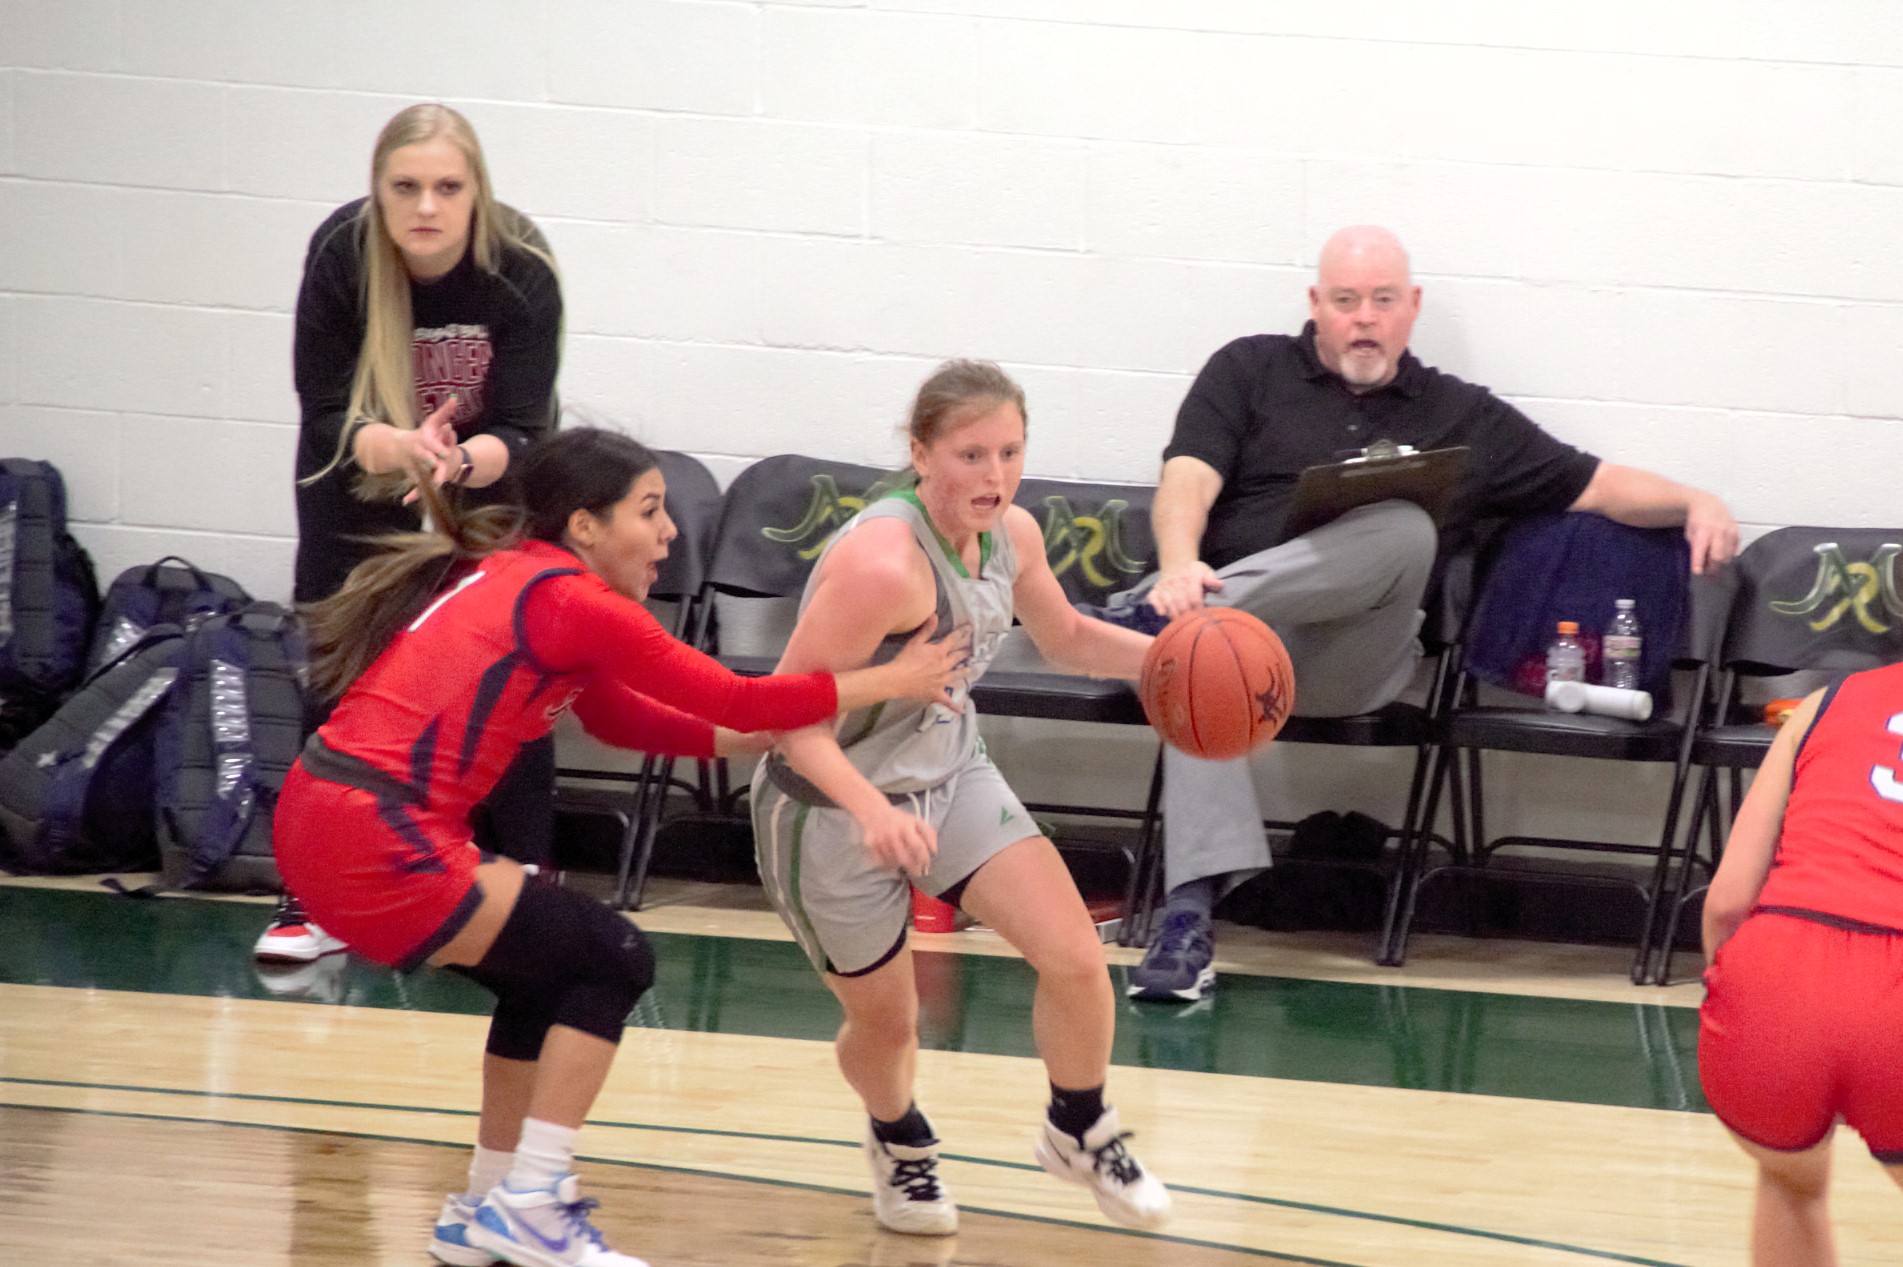 Siena Lingle dribbles around a defender, while the defender tries to hold her back